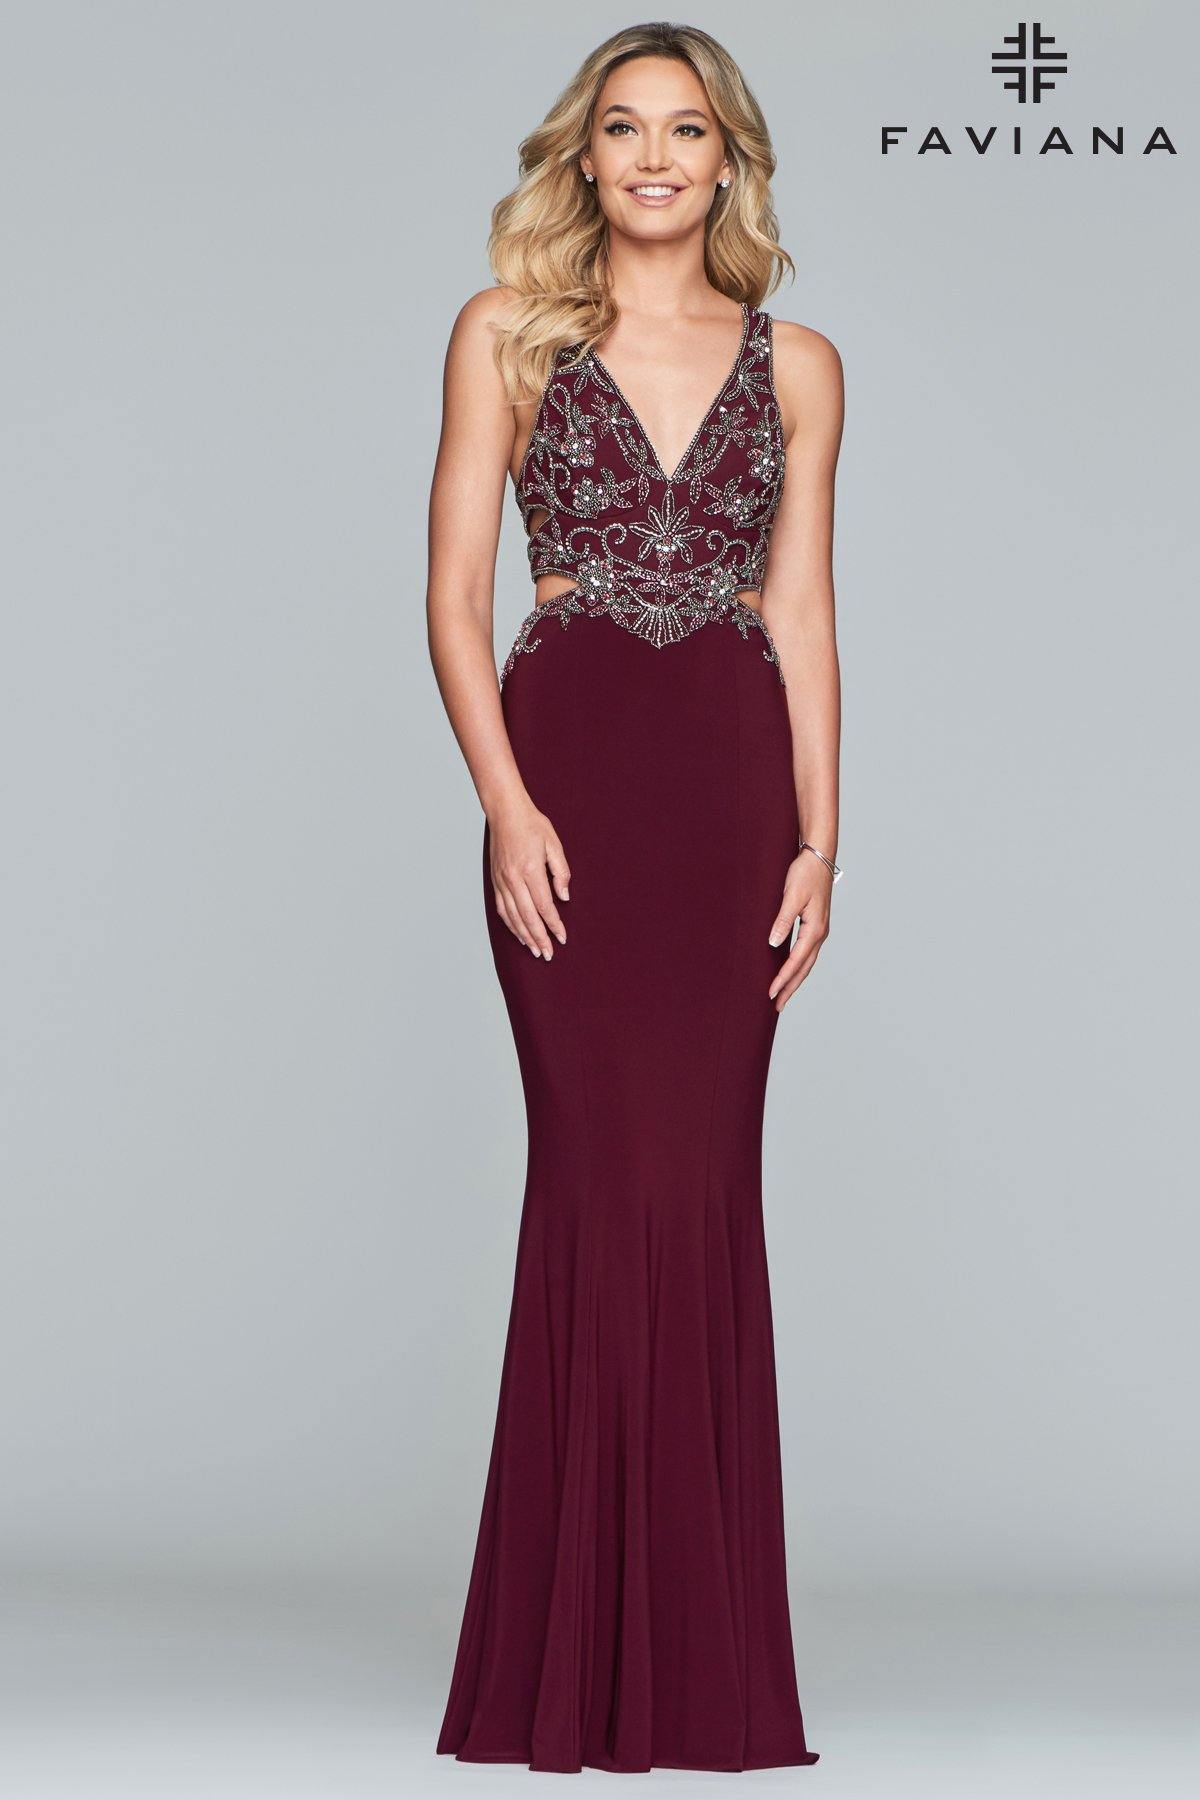 Faviana Long Fitted Prom Dress 10108 Sale - The Dress Outlet